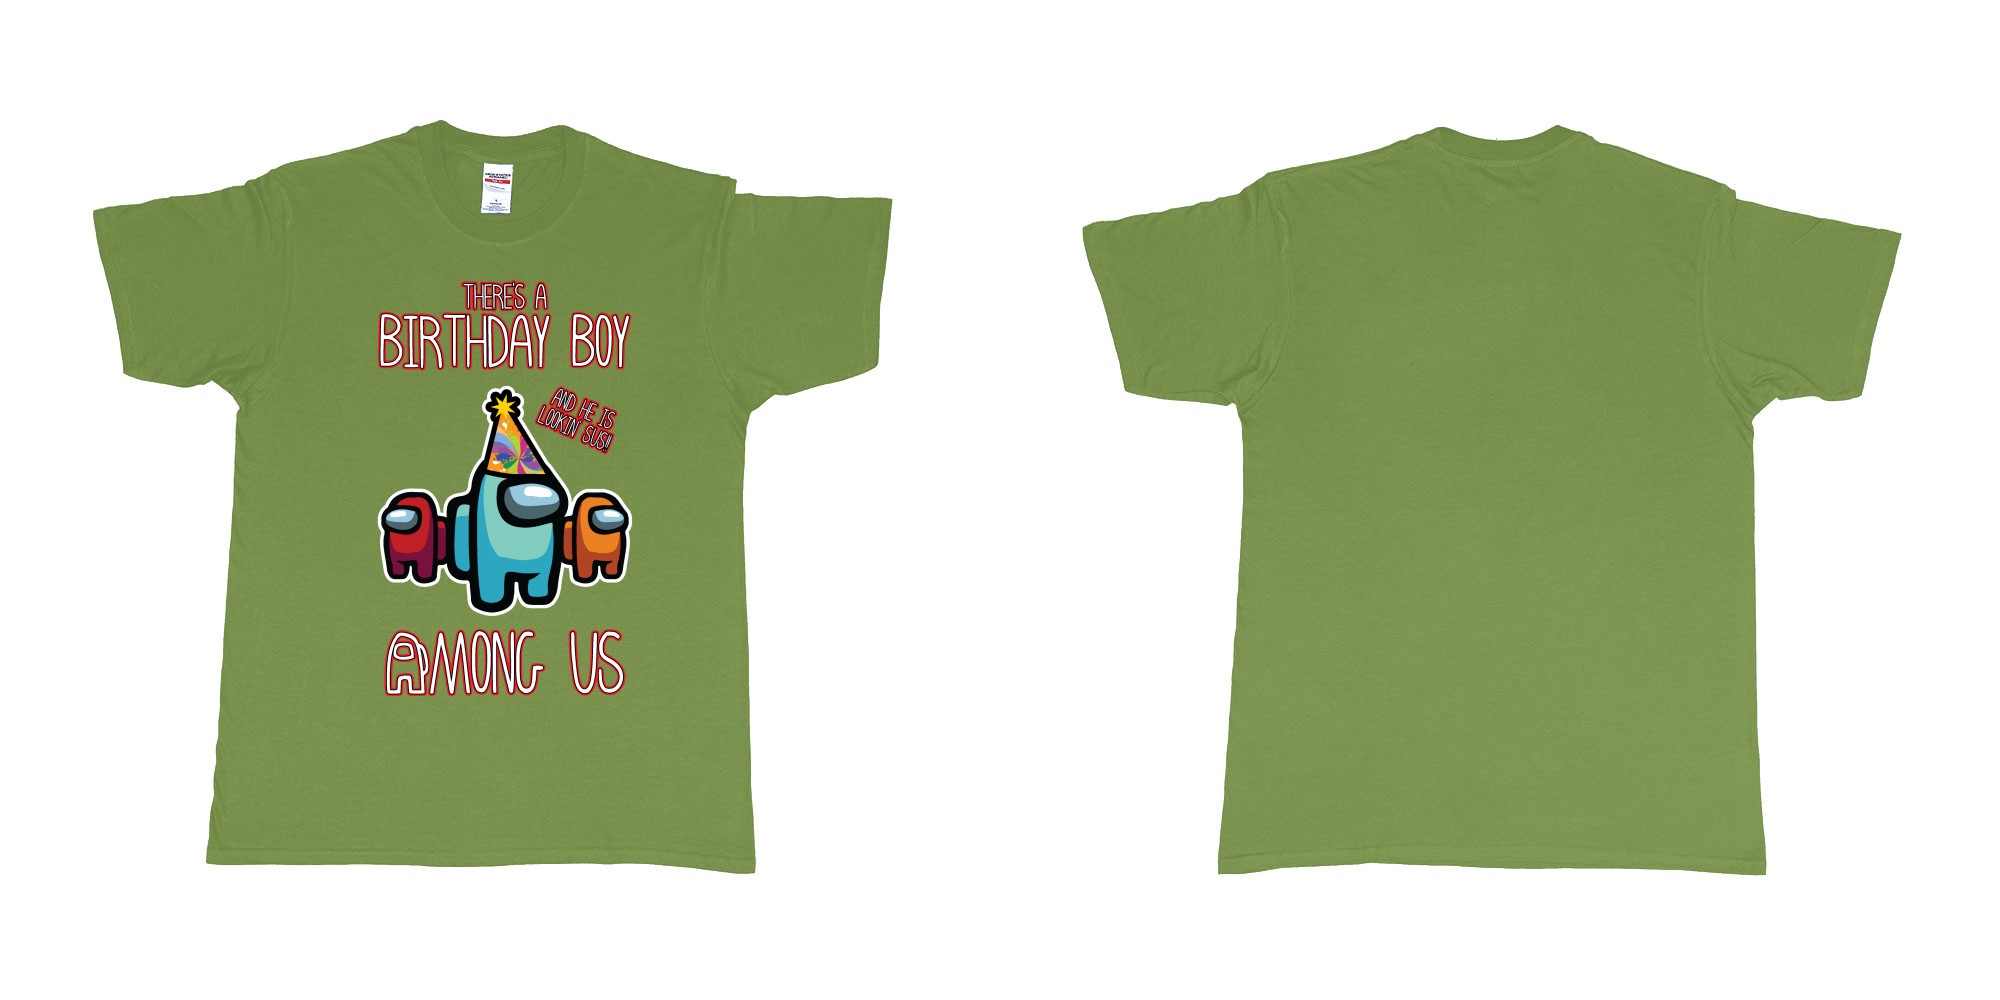 Custom tshirt design among us birthday boy impostor trust no one custom text print tshirt in fabric color military-green choice your own text made in Bali by The Pirate Way